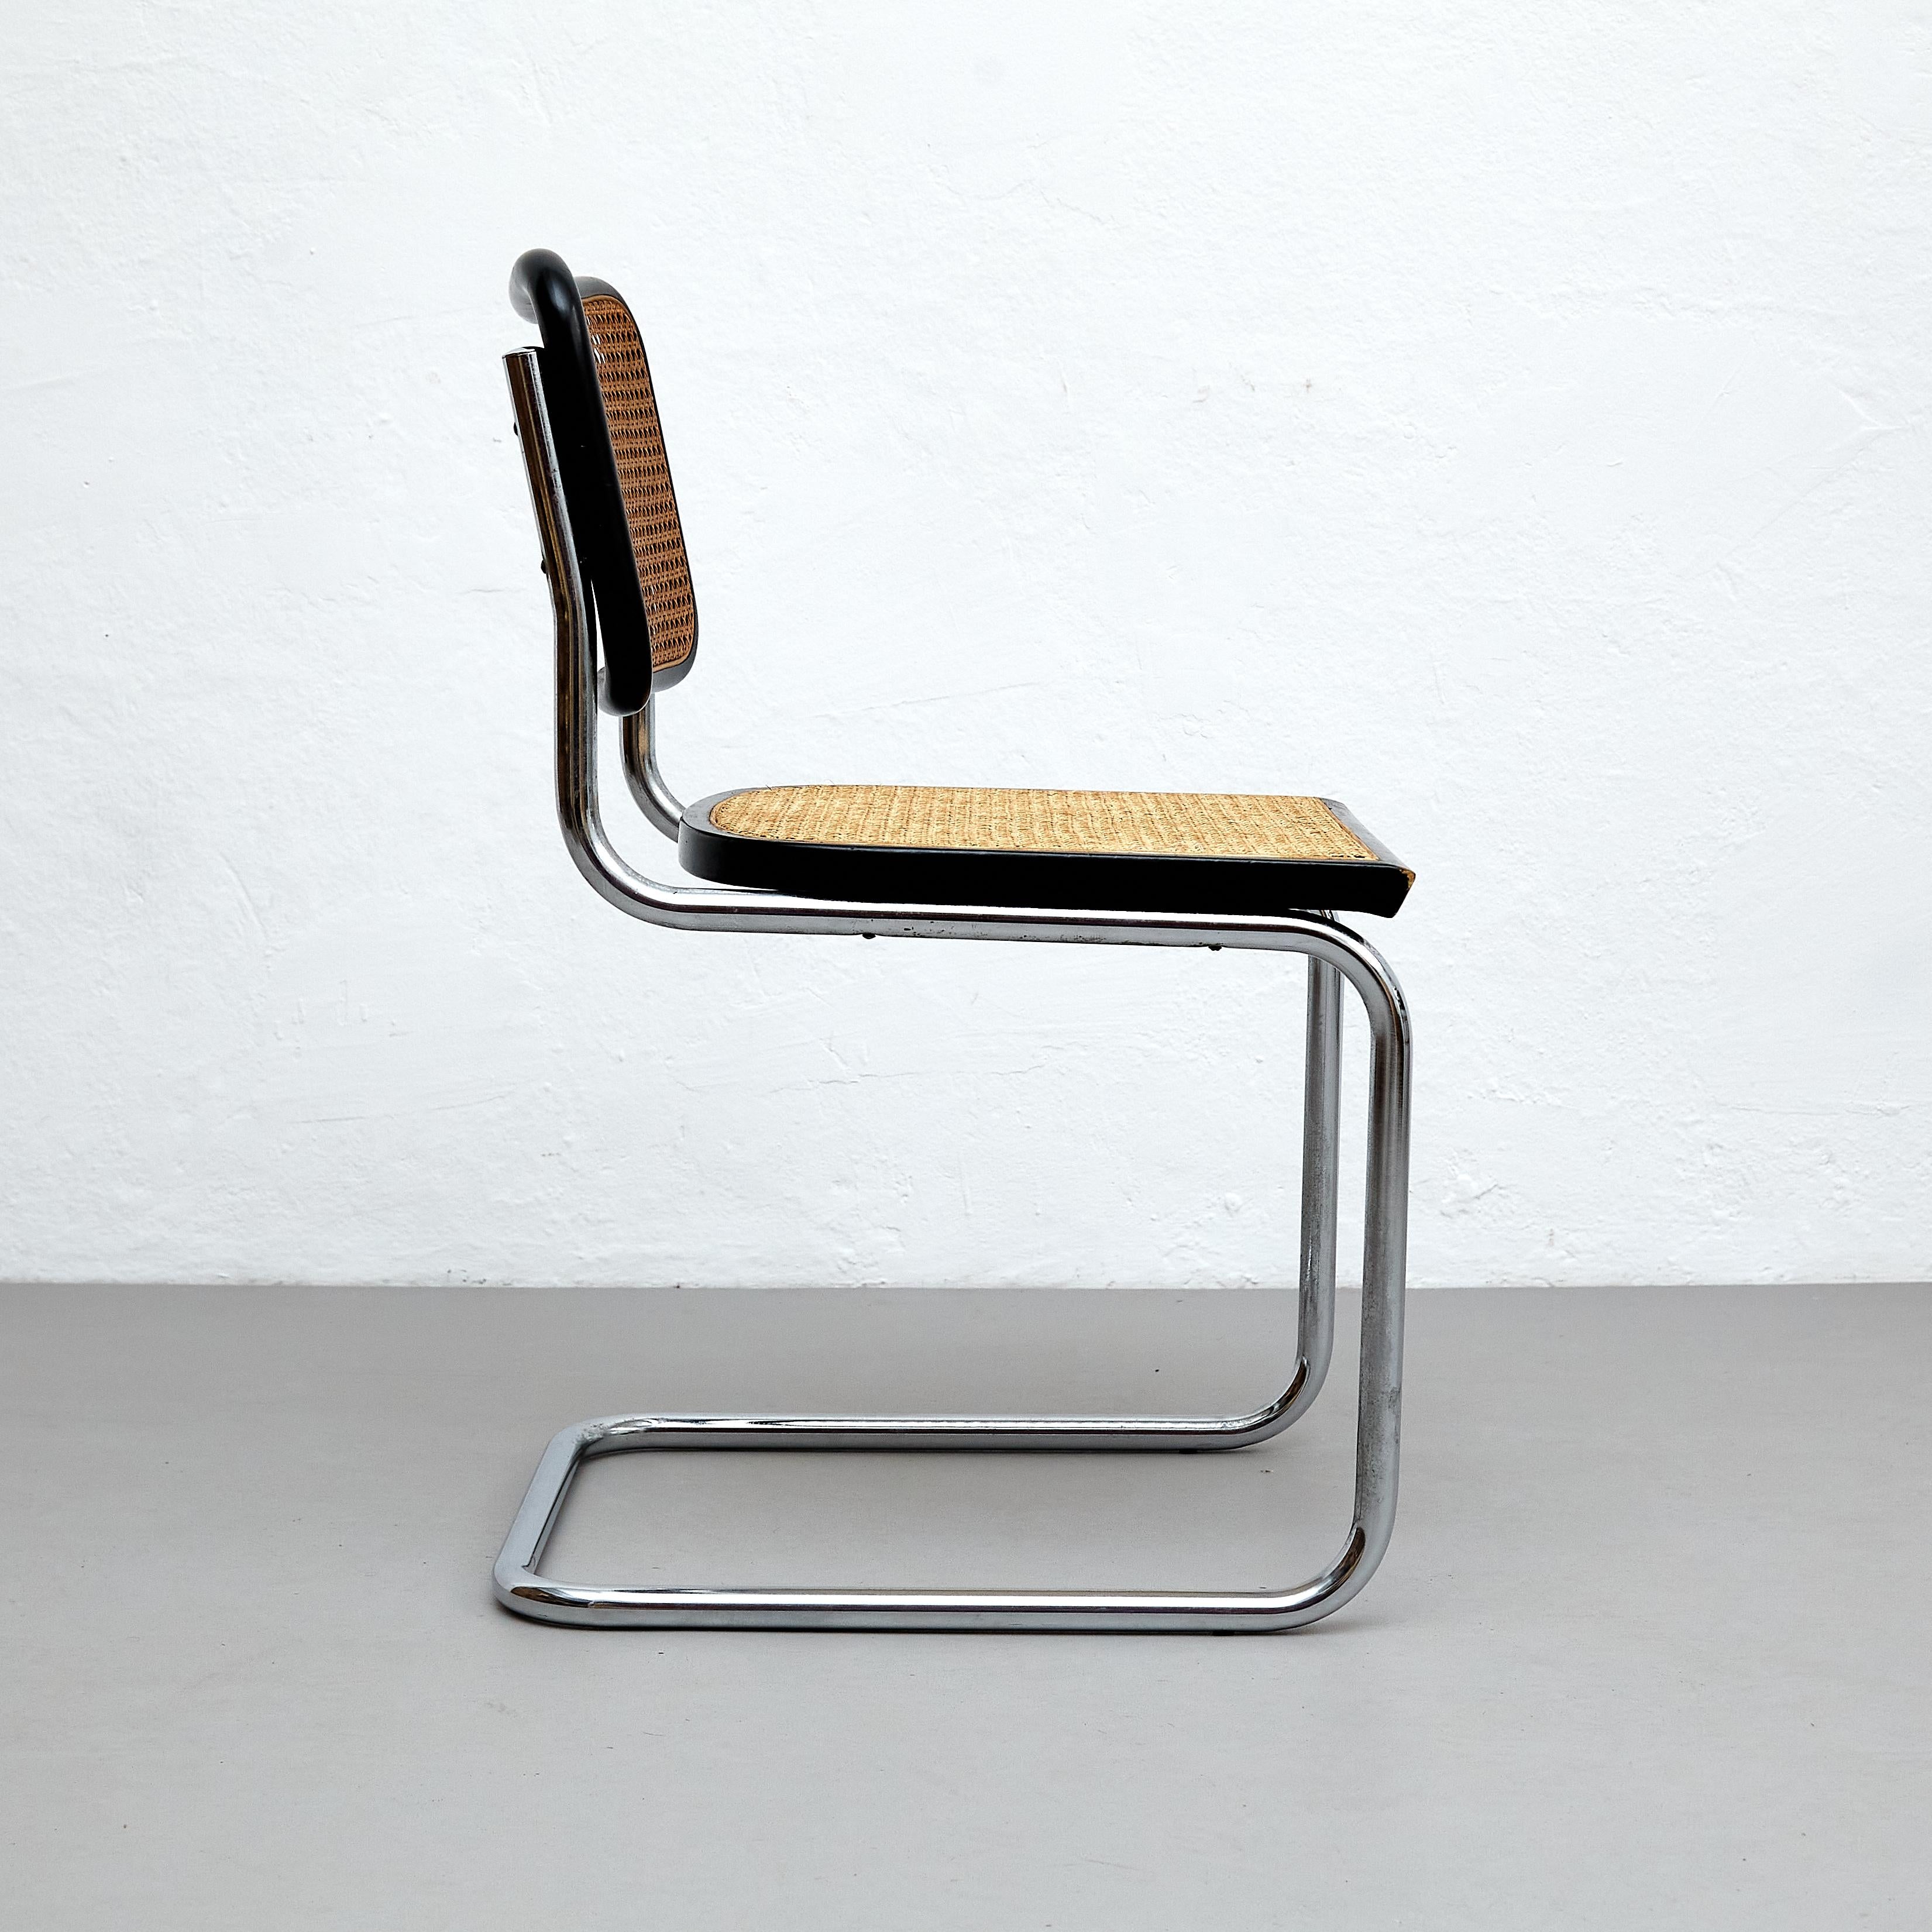 Italian Set of 4 Marcel Breuer Cesca Metal and Wood Mid-Century Modern Chairs, C. 1960 For Sale